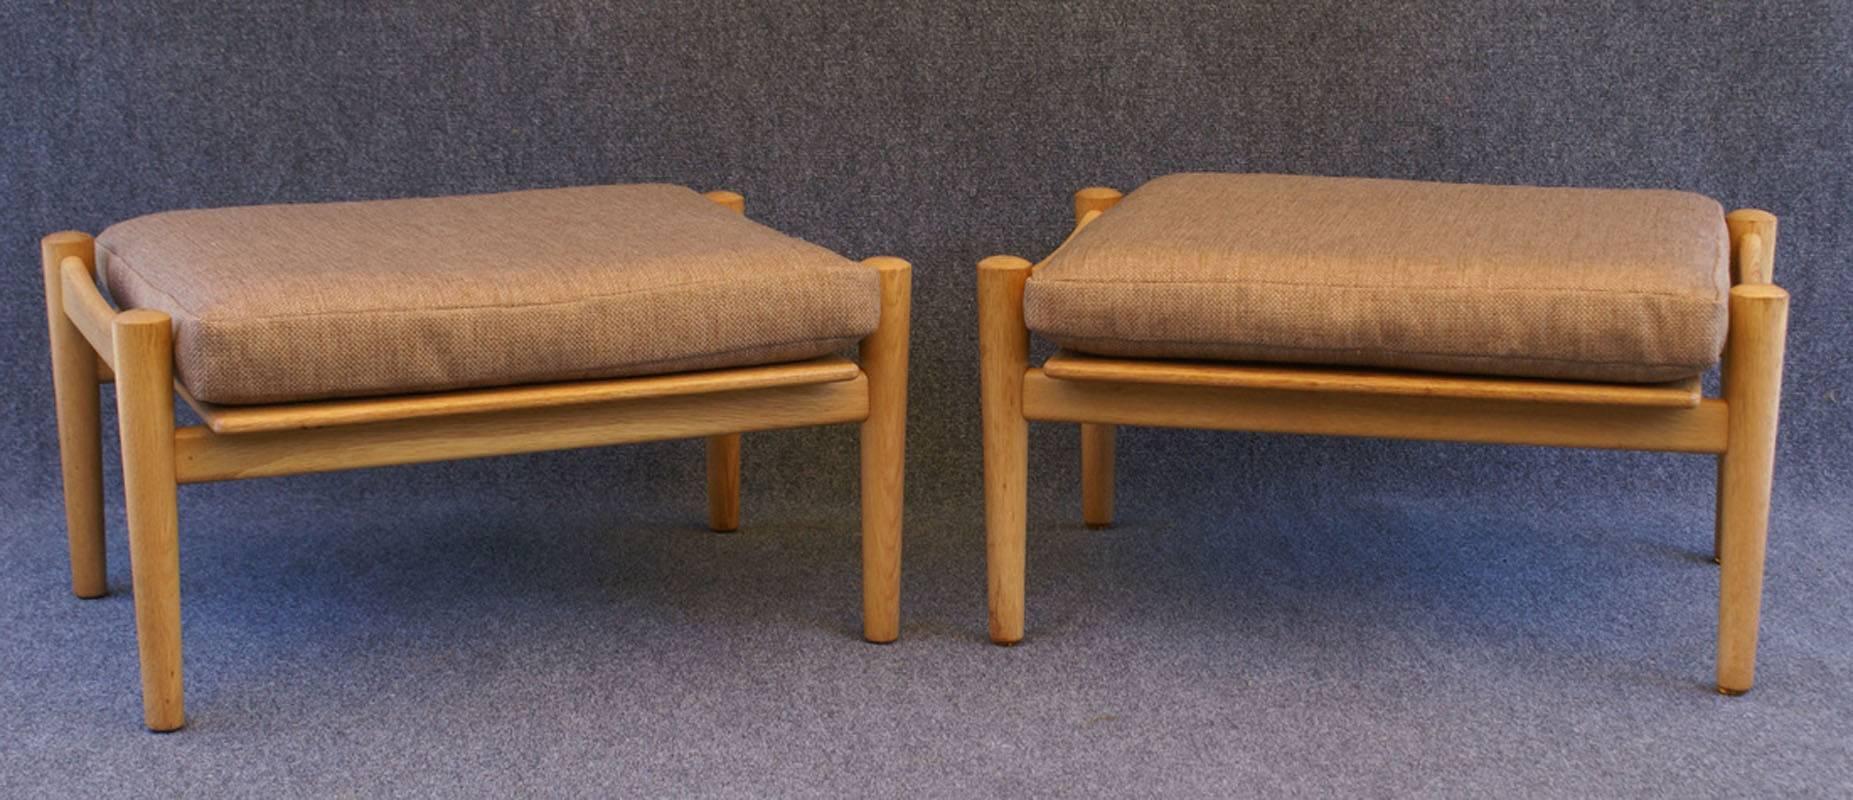 Danish Pair of High Back Oak GE530 Chairs with Ottomans by Hans J. Wegner for GETAMA